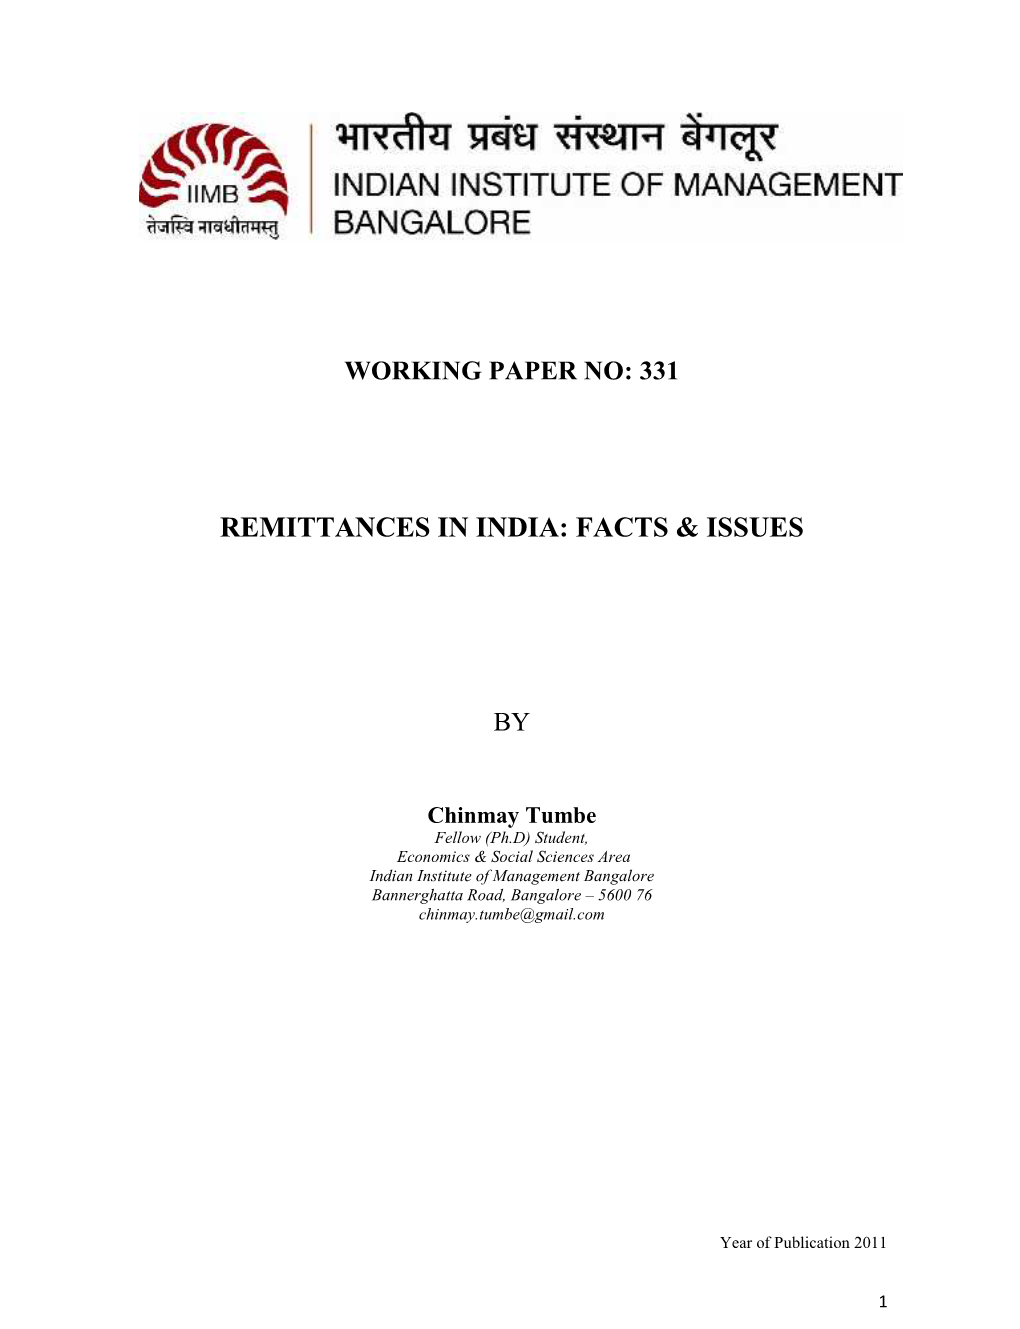 Remittances in India: Facts & Issues